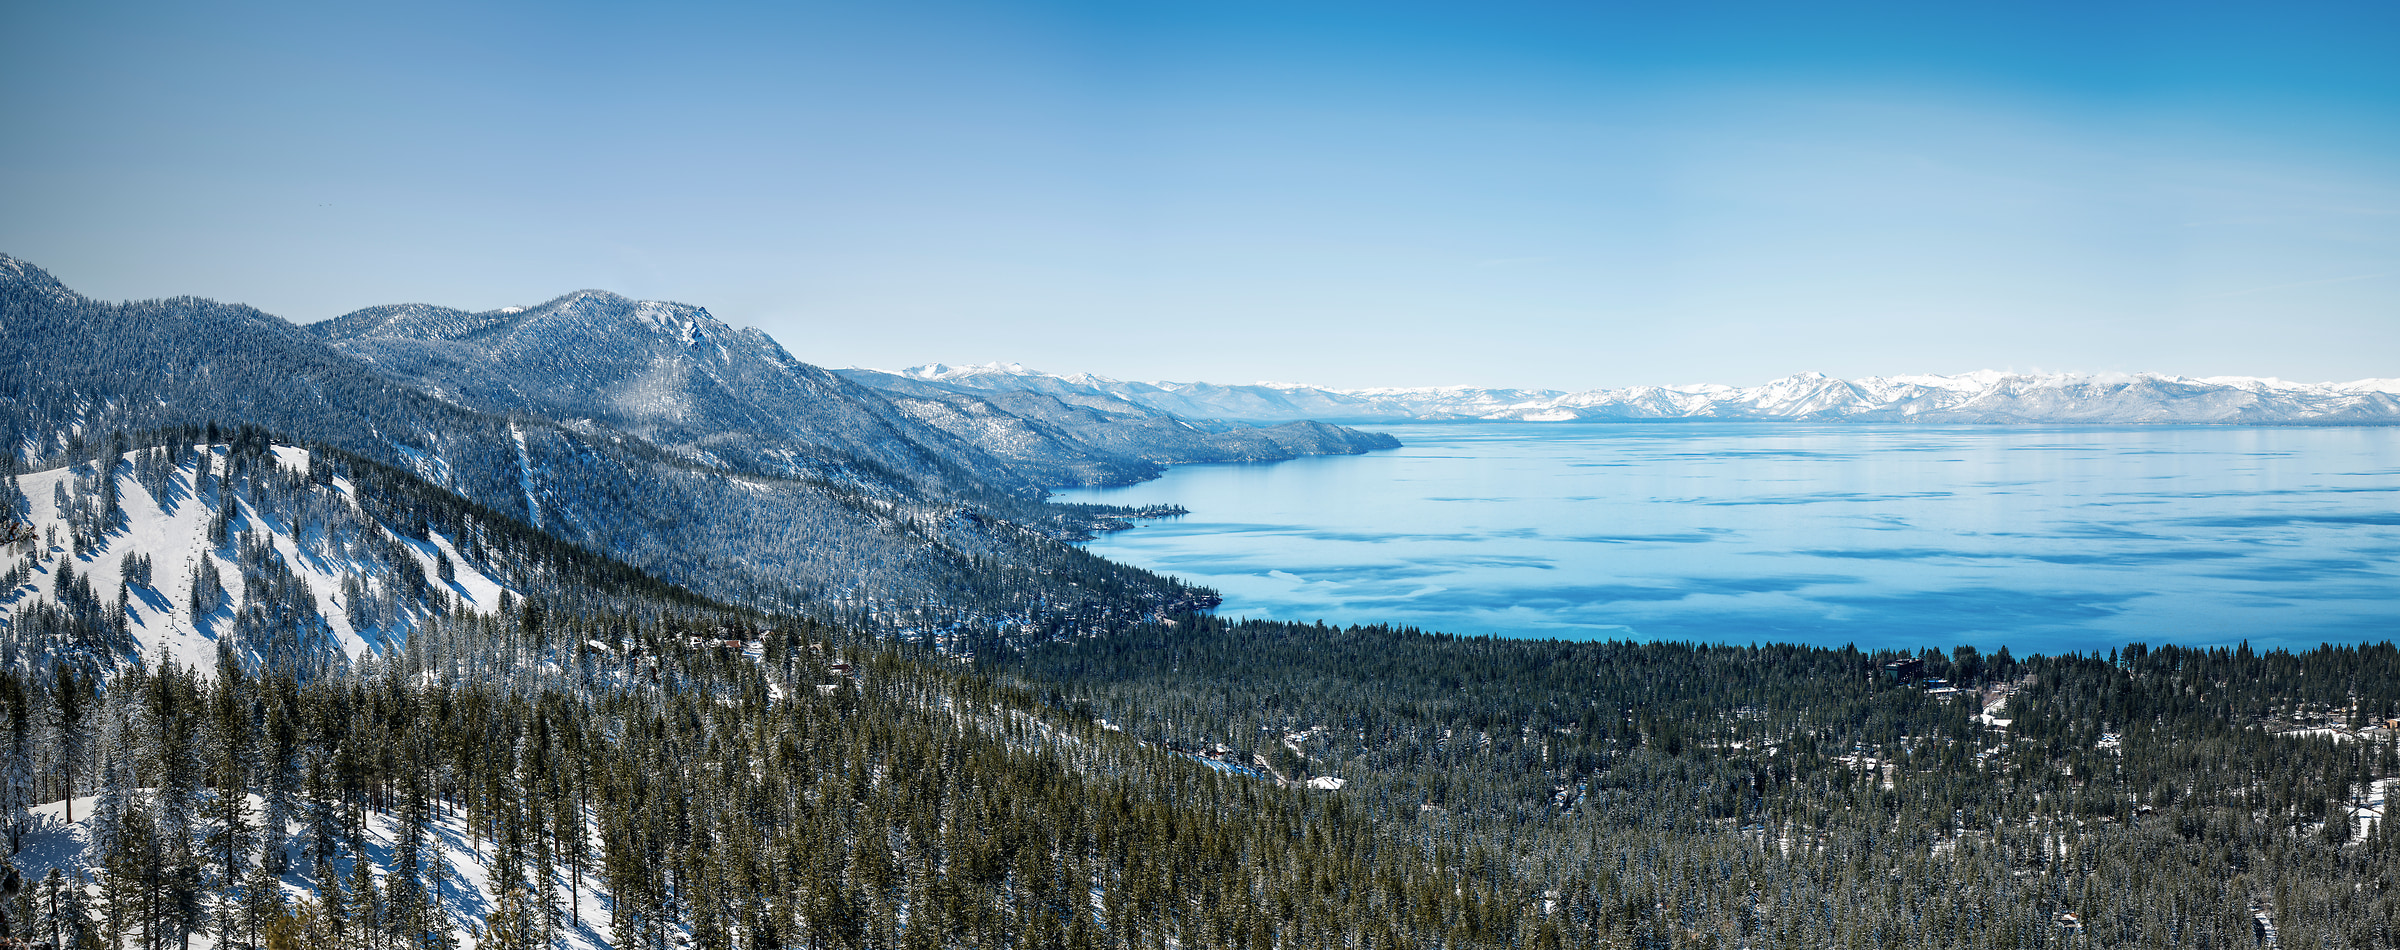 286 megapixels! A very high resolution, large-format VAST photo of Lake Tahoe in winter with snow; fine art landscape photograph created by Justin Katz from Mount Rose Highway in Nevada.